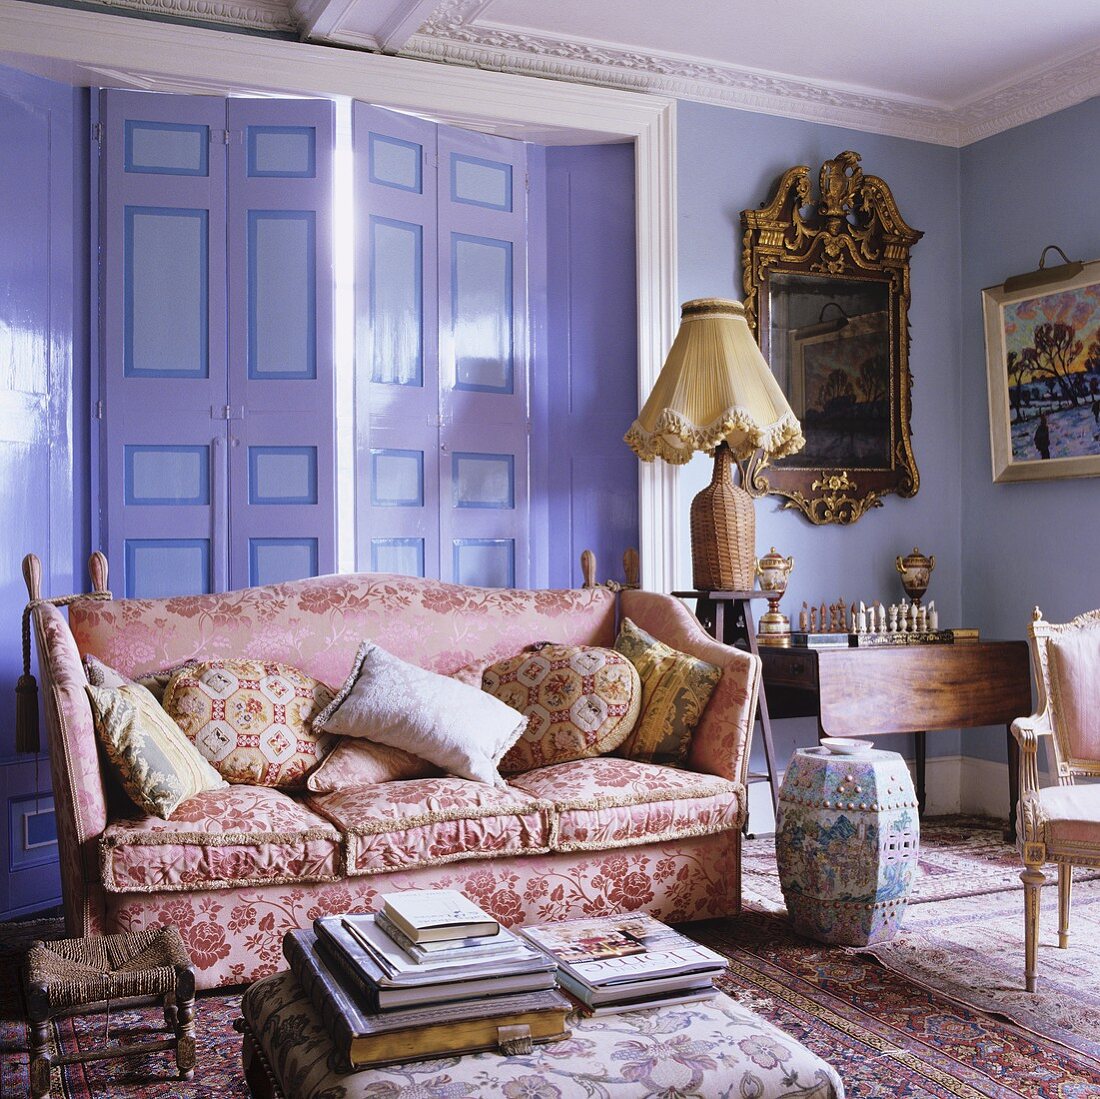 A shiny pink sofa and small items of furniture in a lilac-painted living room in a country house